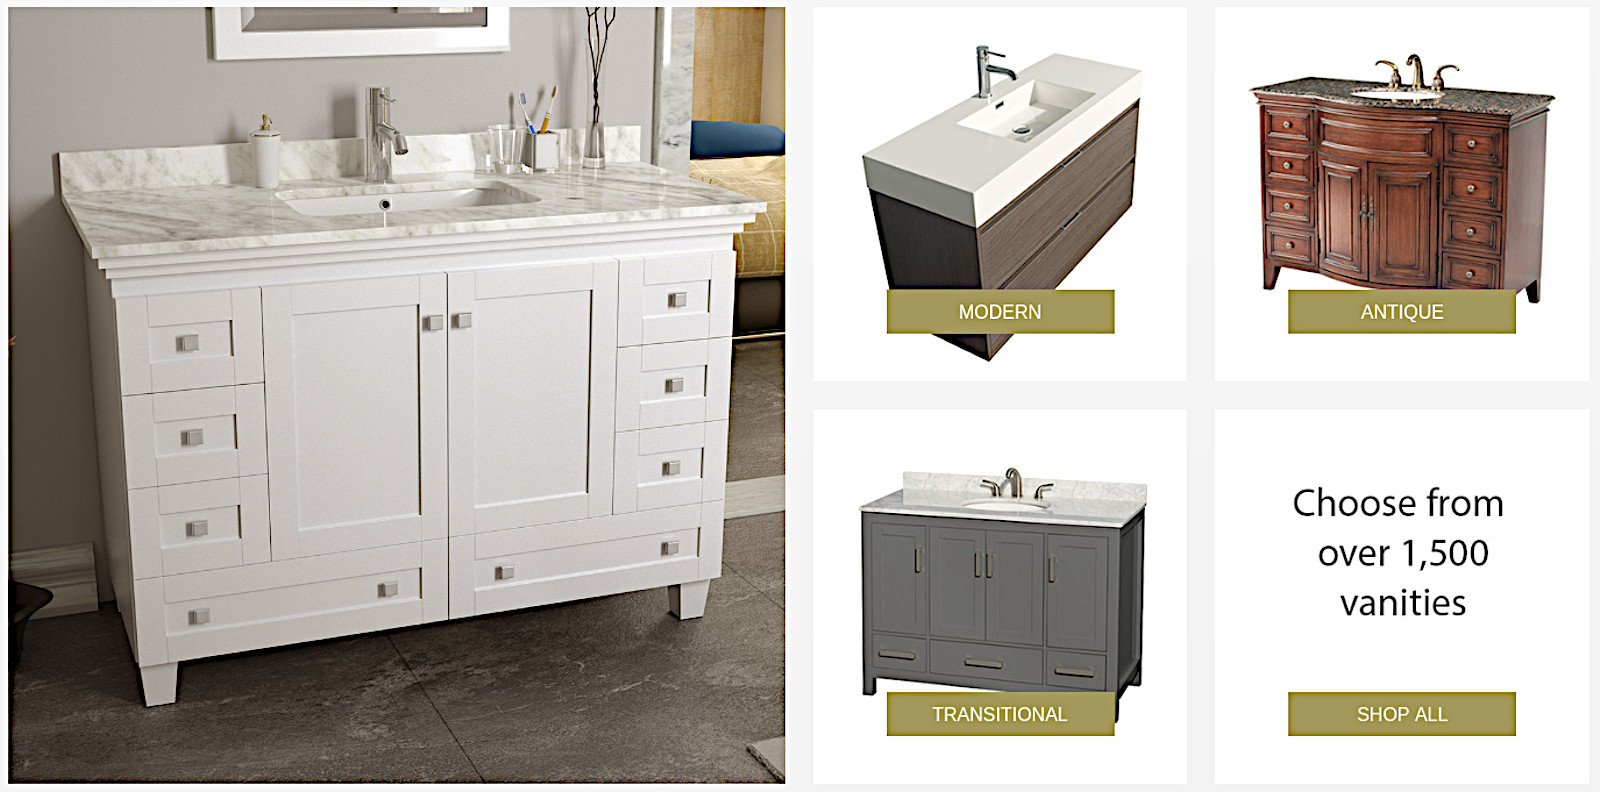 At A Bargain Price modern antique transitional vanities